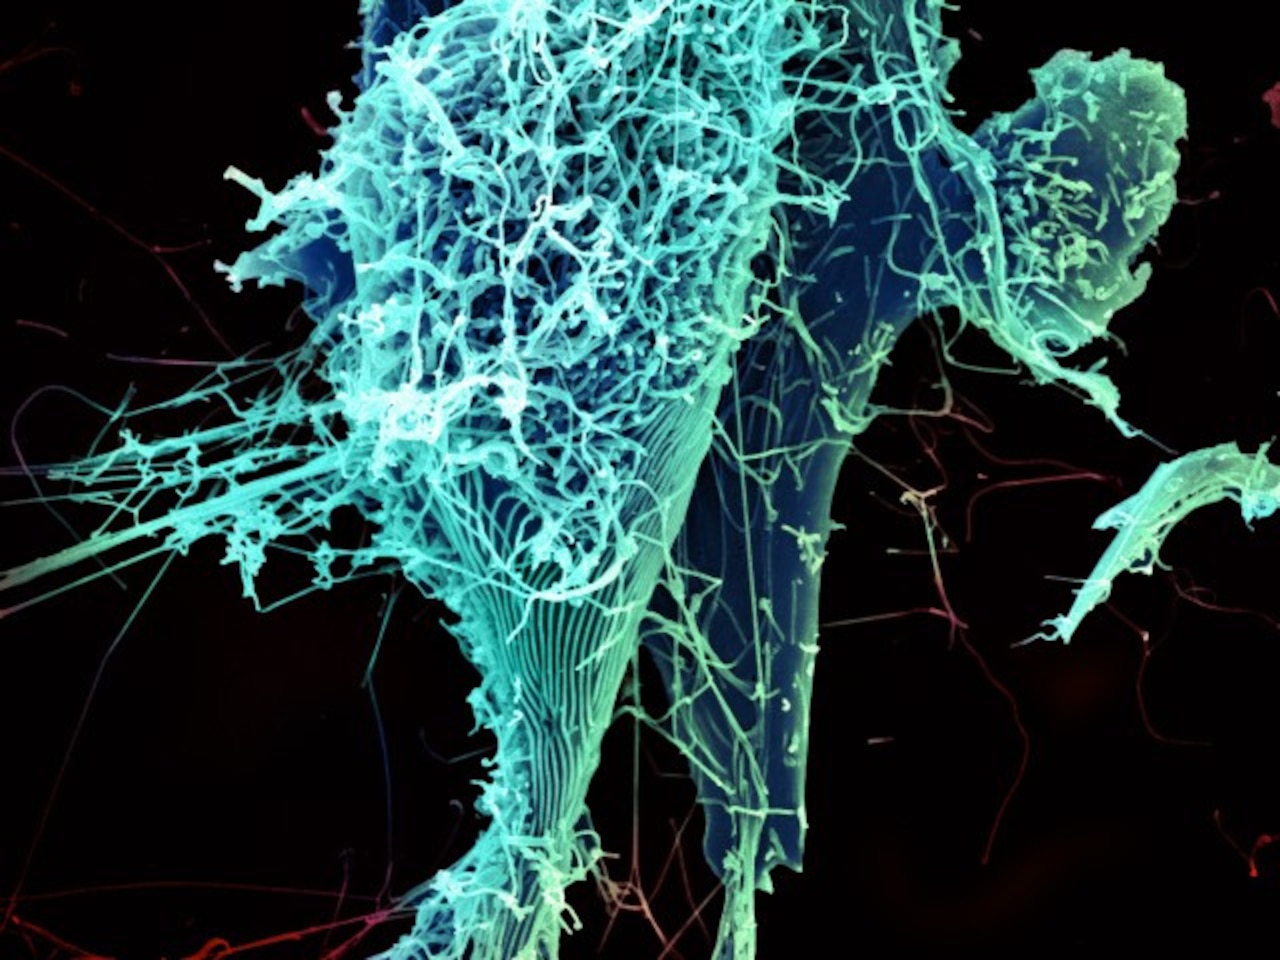 String-like Ebola virus particles shed from an infected cell in this electron micrograph. National Institute of Allergy and Infectious Diseases photo